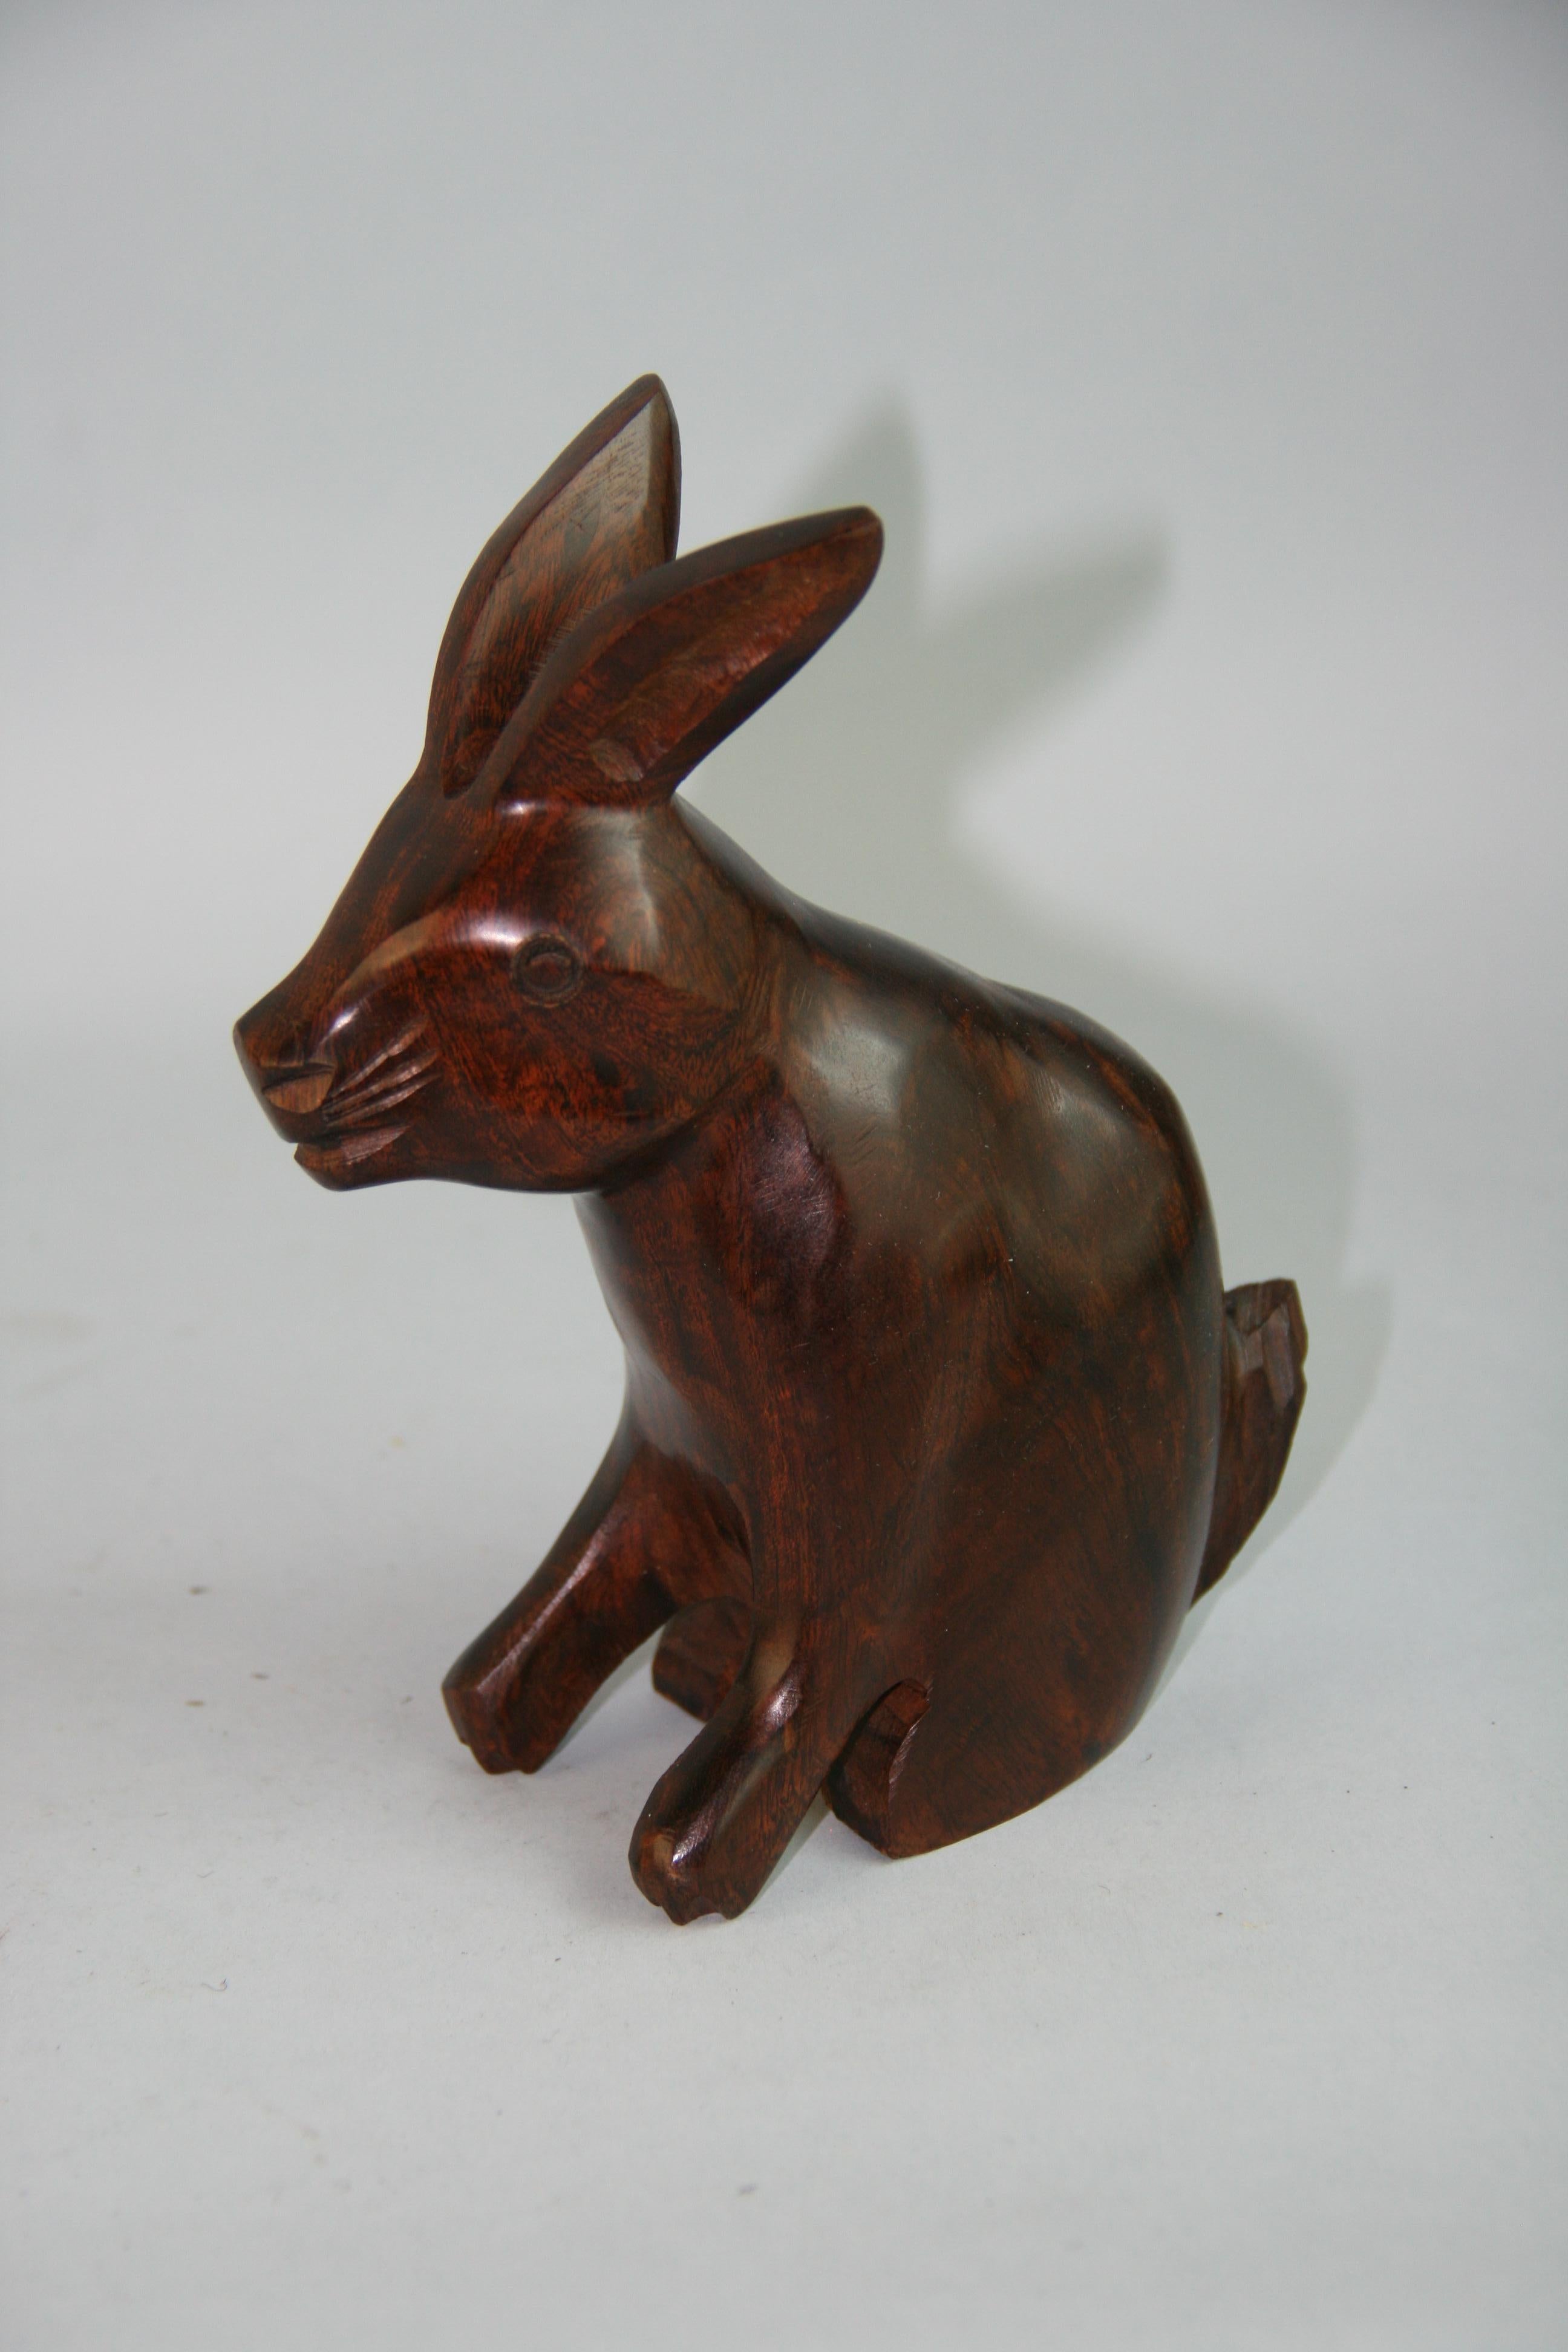 Japan hand carved rosewood rabbit.